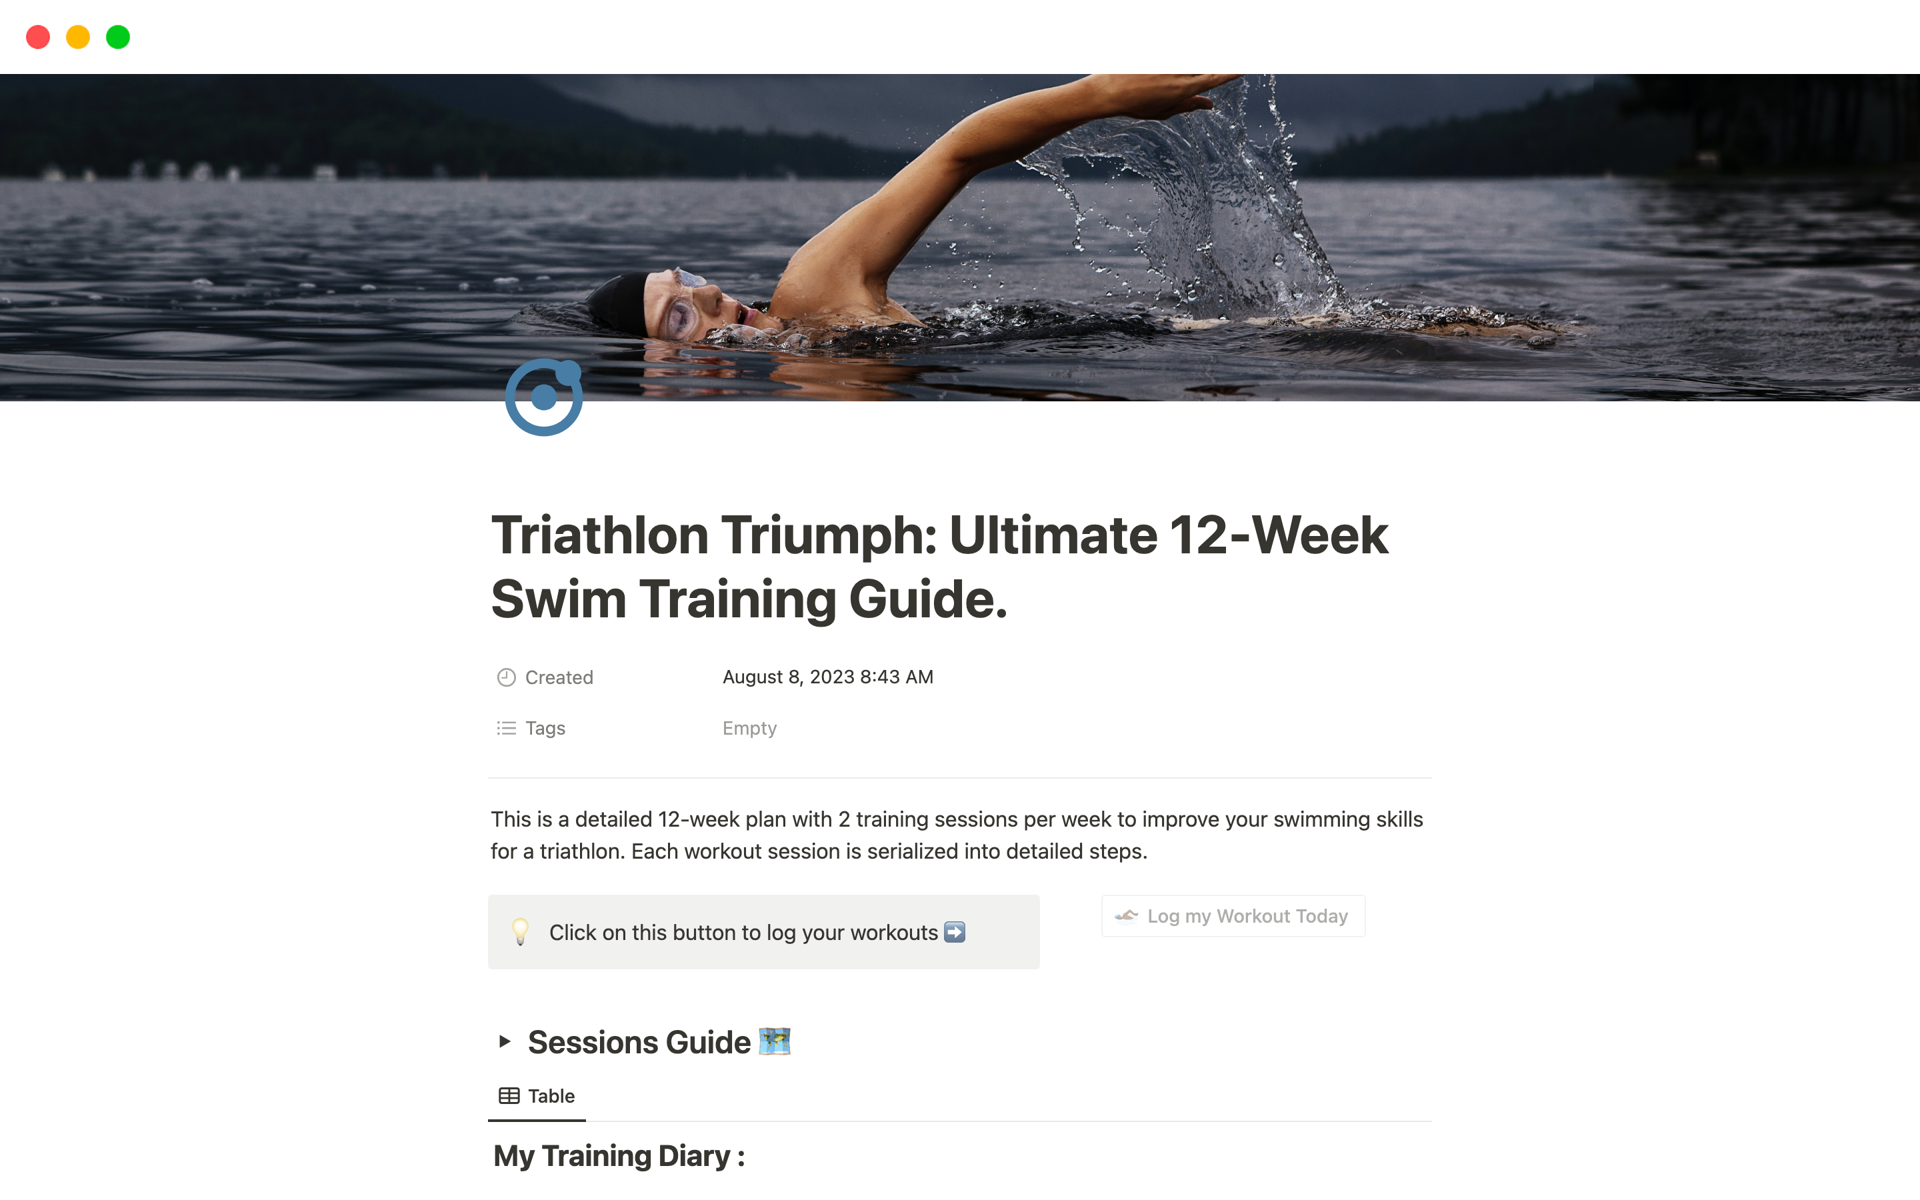 This template provides a detailed, step-by-step guide for beginner swimmers to improve their skills, endurance, and speed.